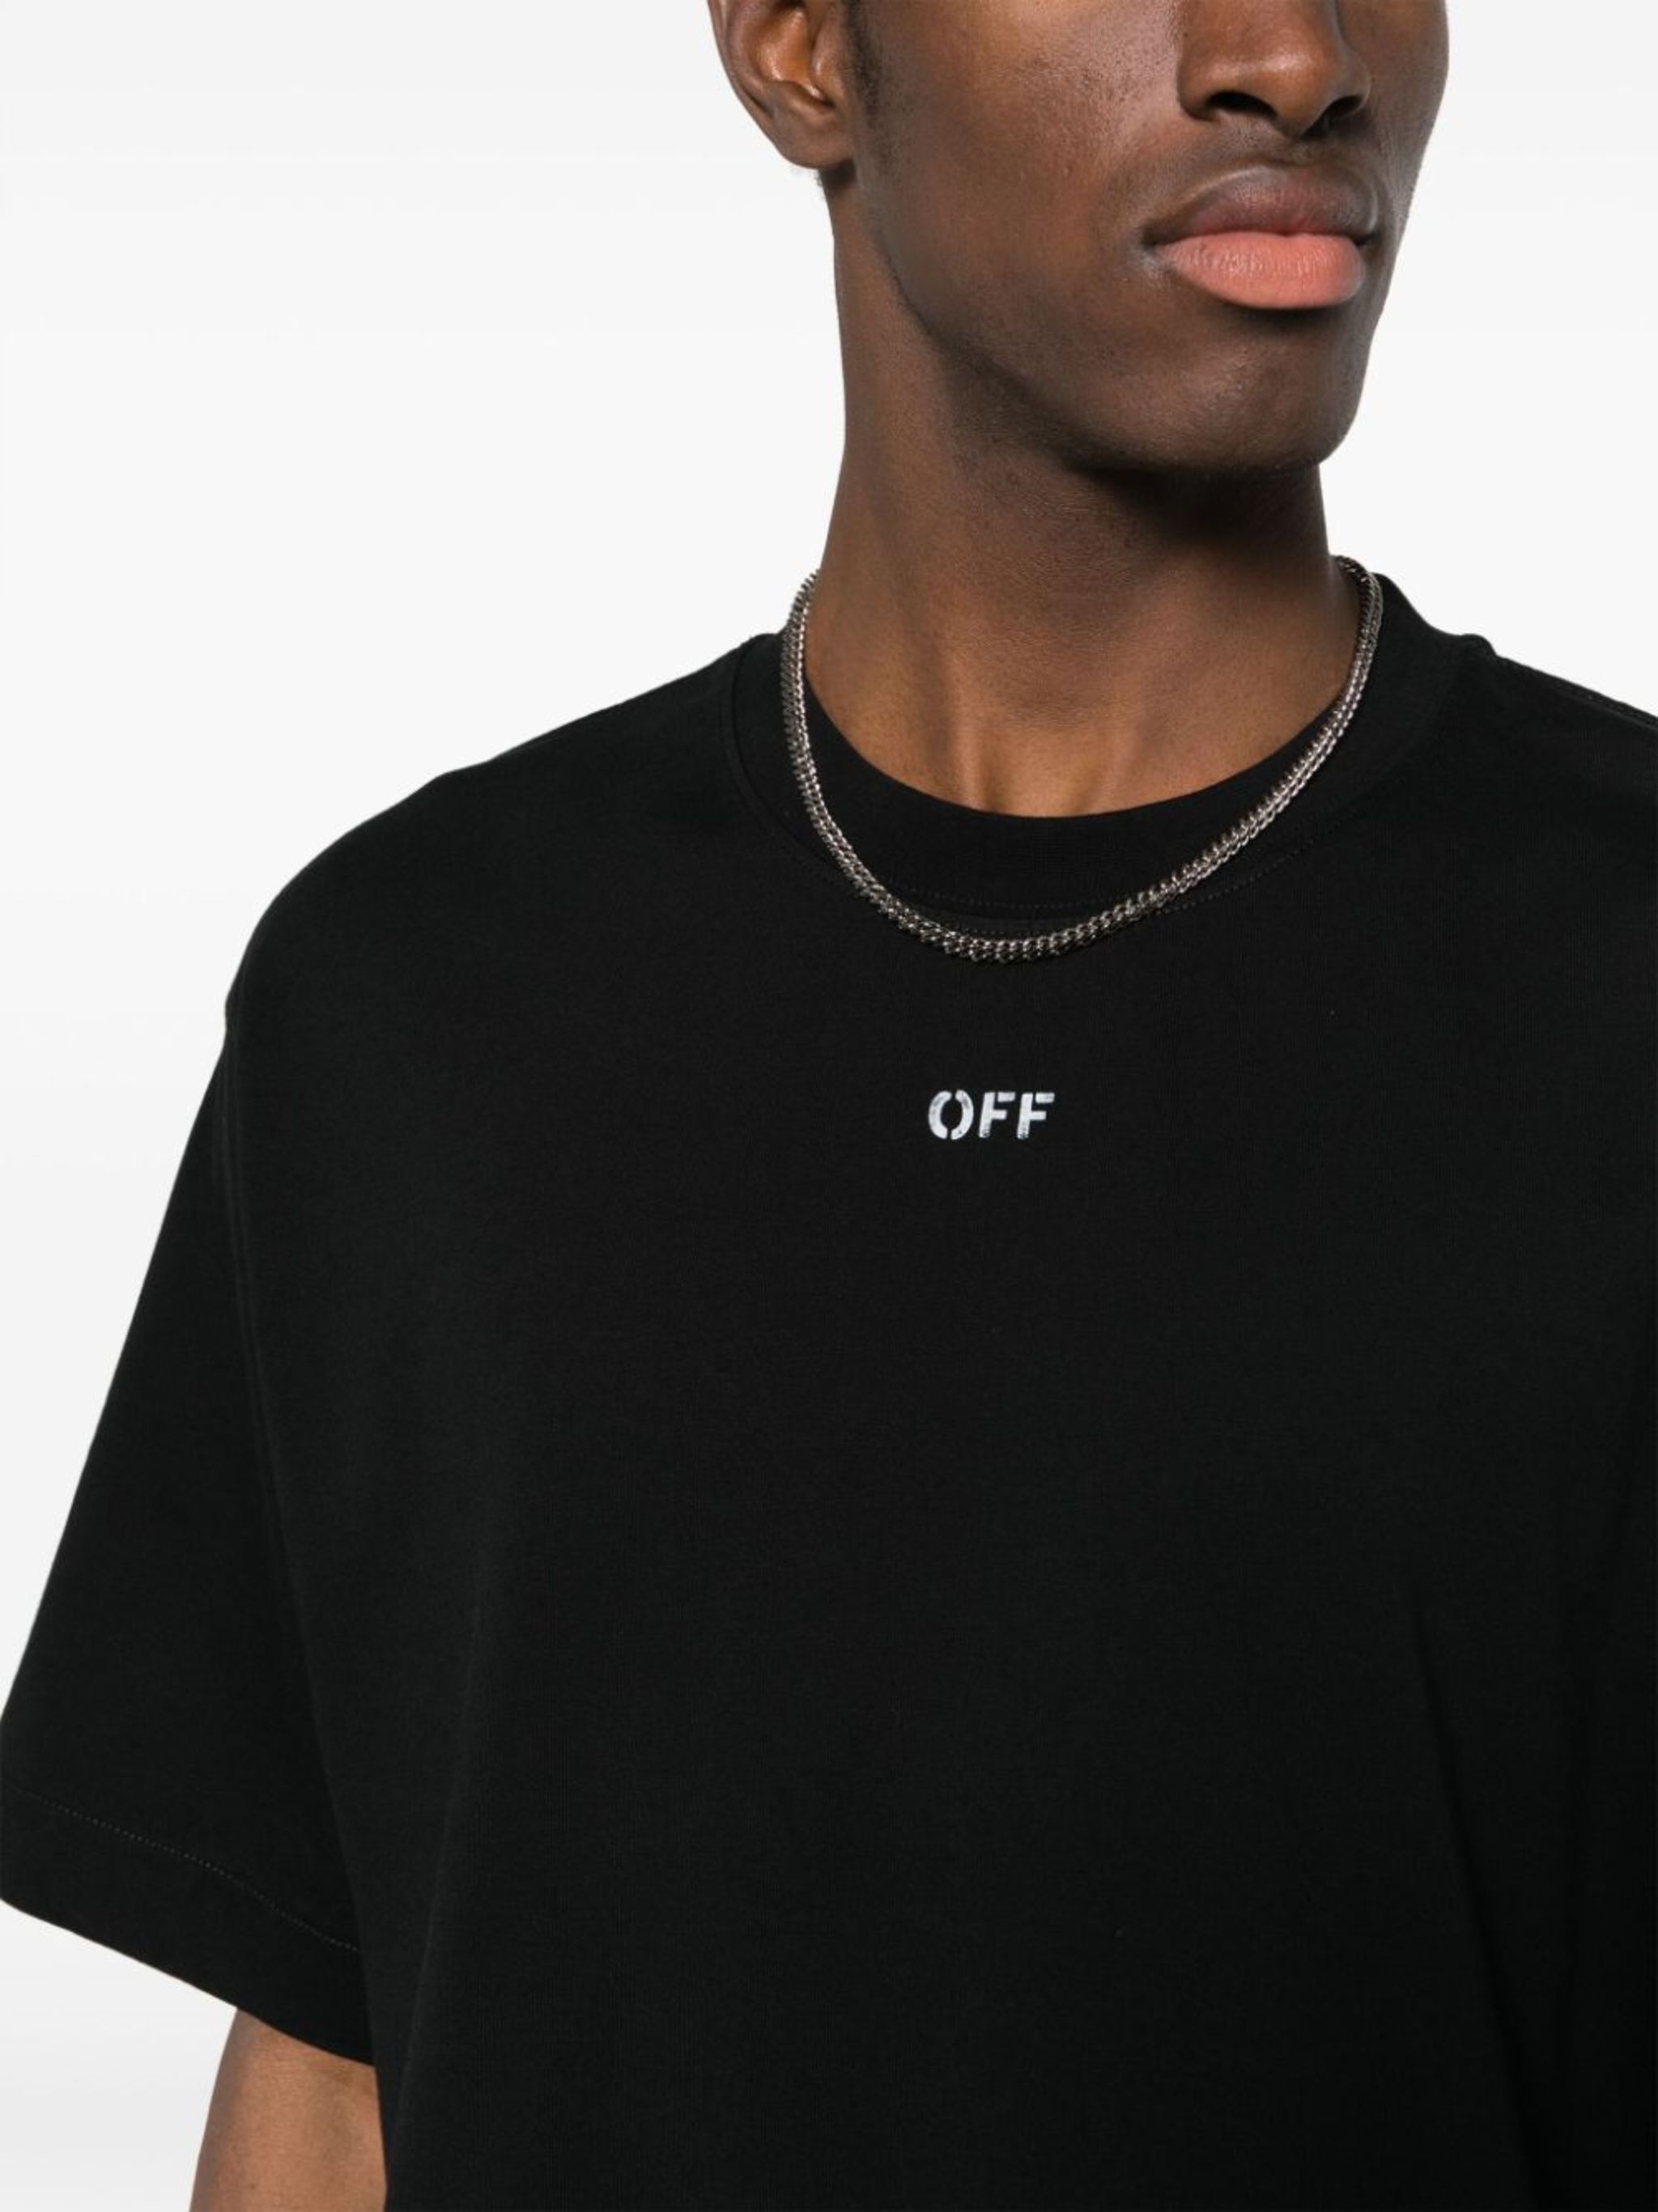 Off Stamp cotton T-shirt - 5